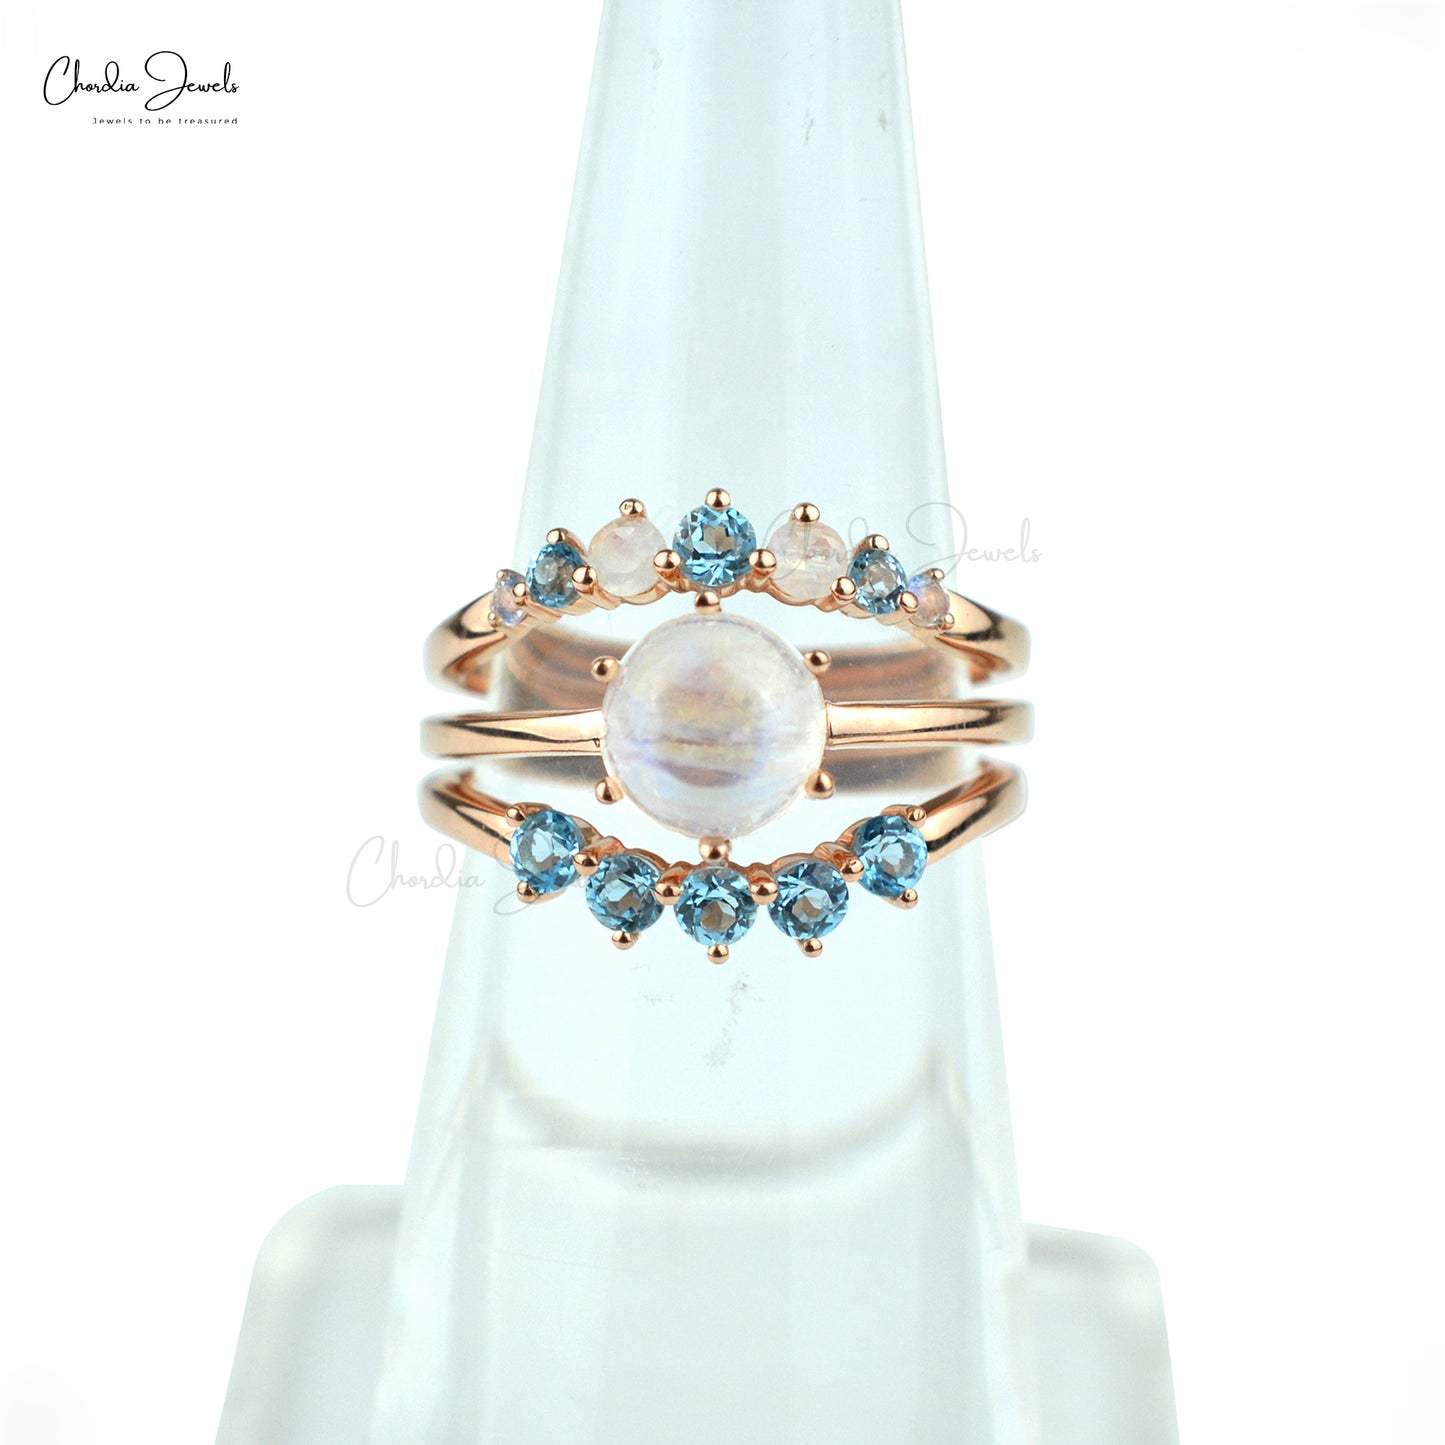 100% Natural Rainbow Moonstone With Swiss Blue Topaz Ring Round Stackable Gemstone Engagement Ring in 925 Sterling Silver At Wholesale Price